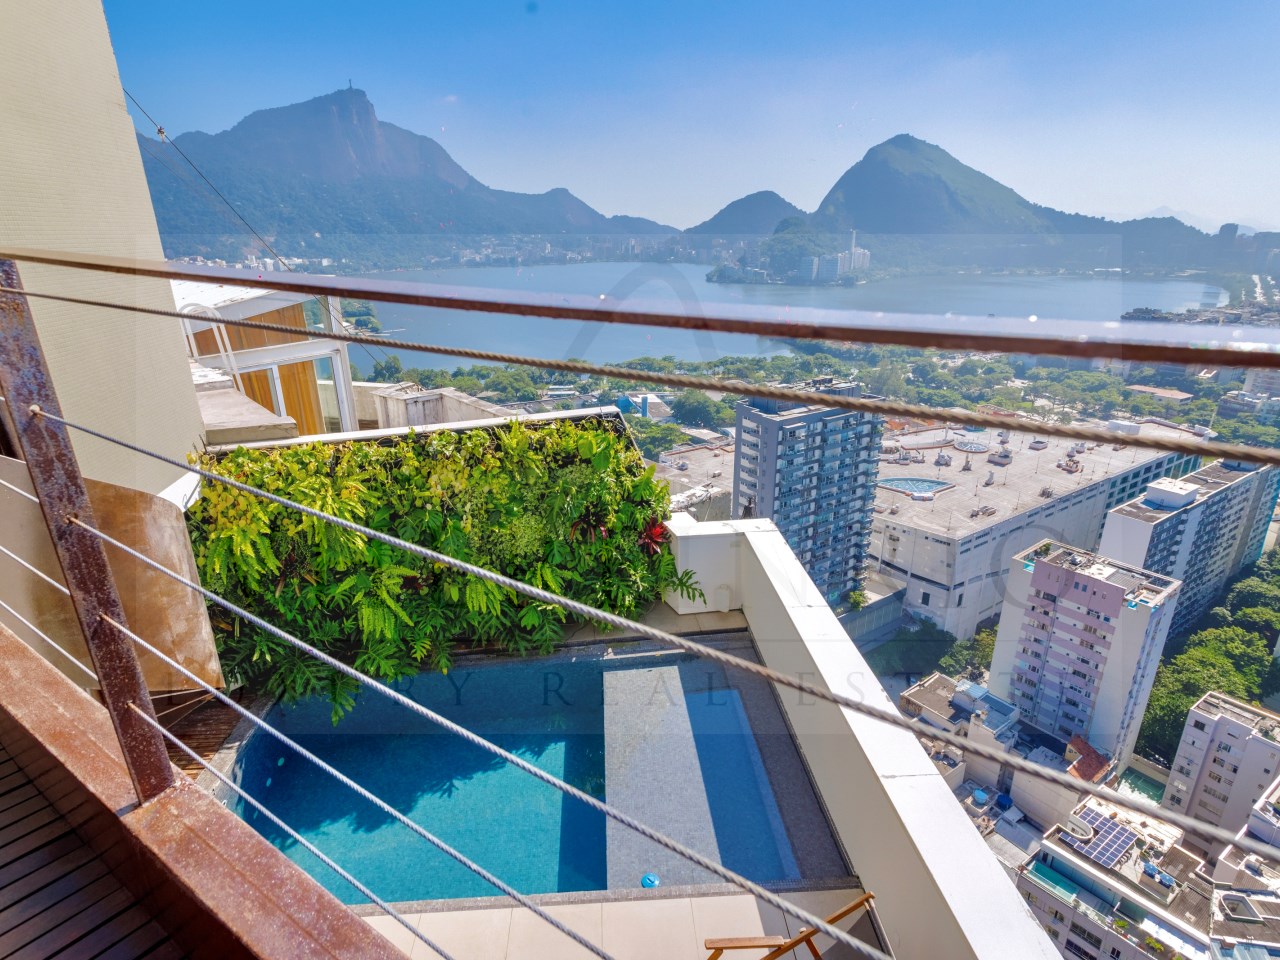 Discover the most beautiful luxury penthouses on the Rio de